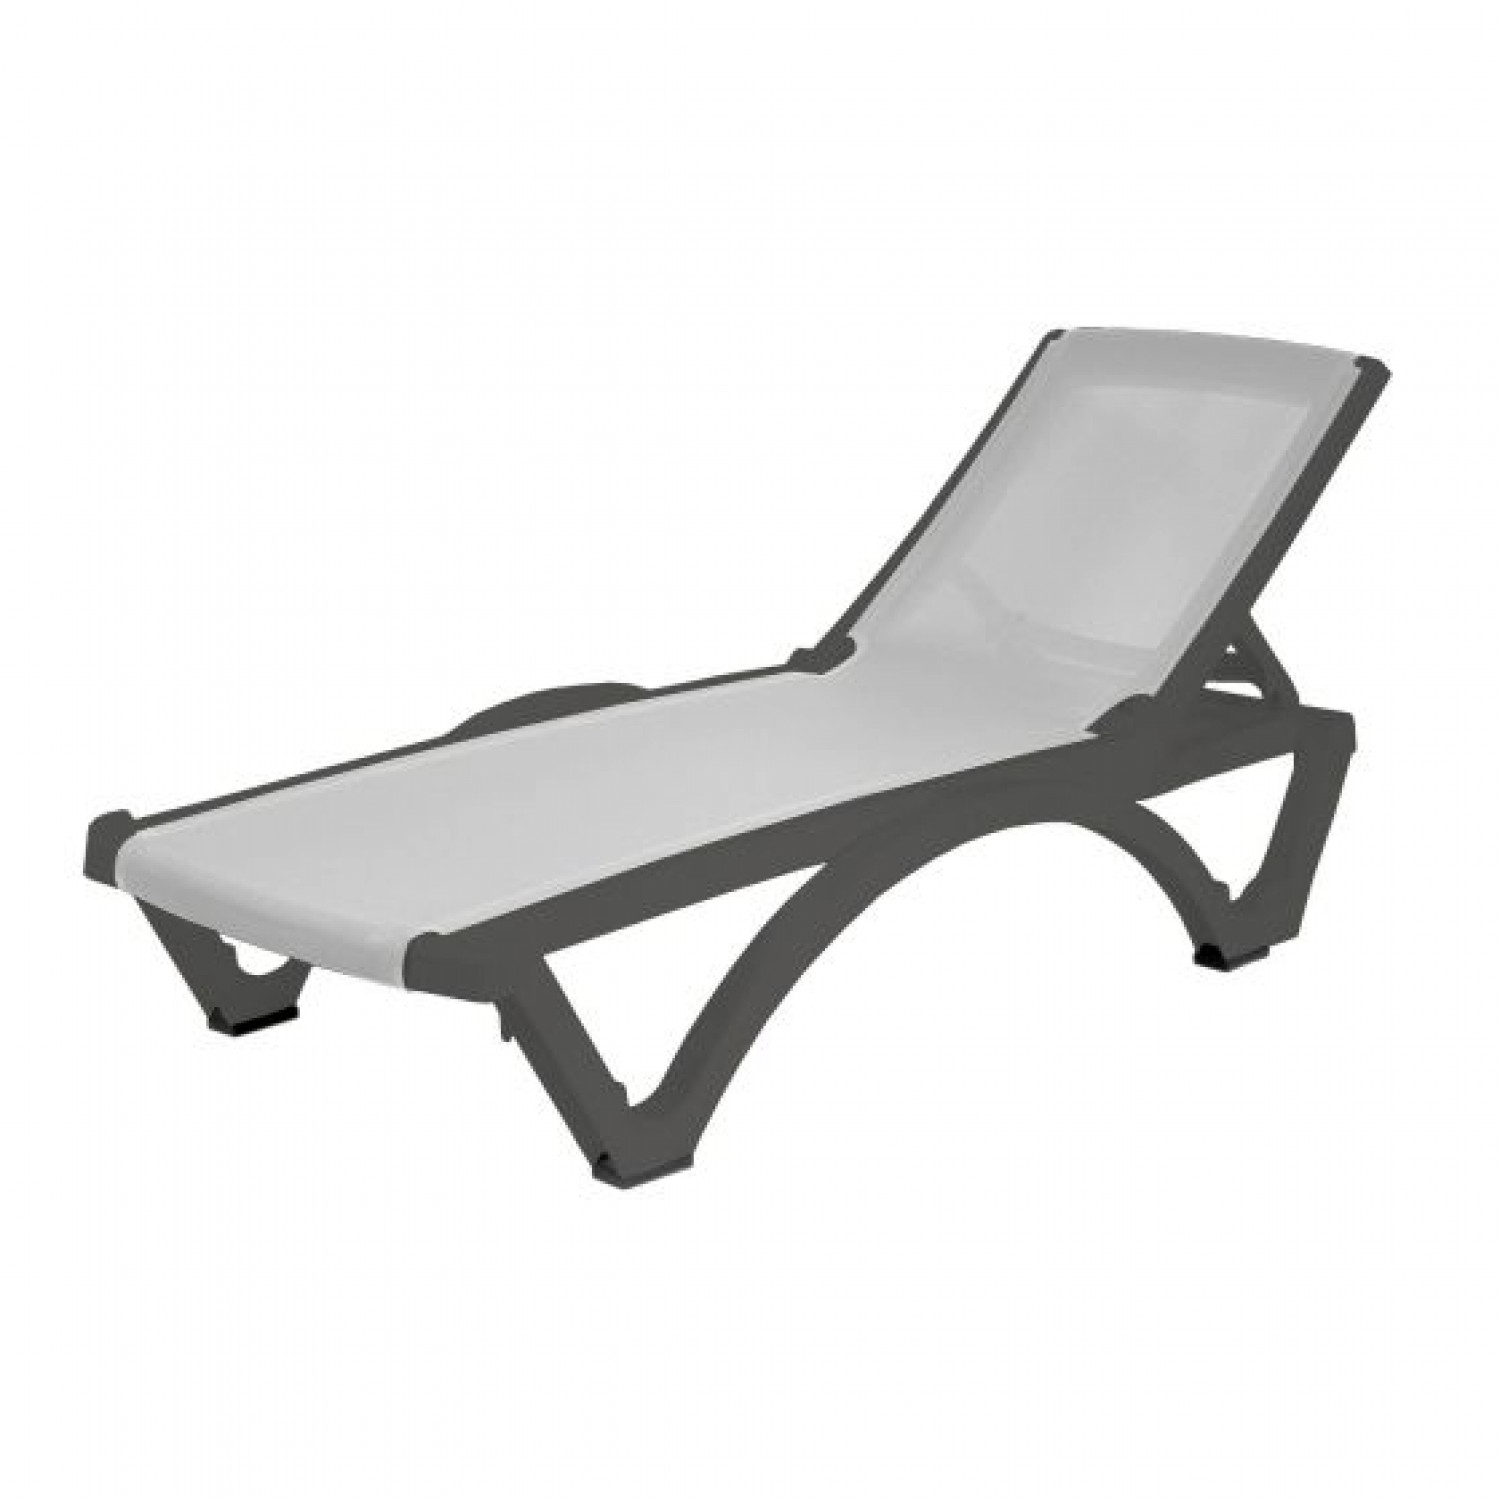 Baja Outdoor Chaise Lounge